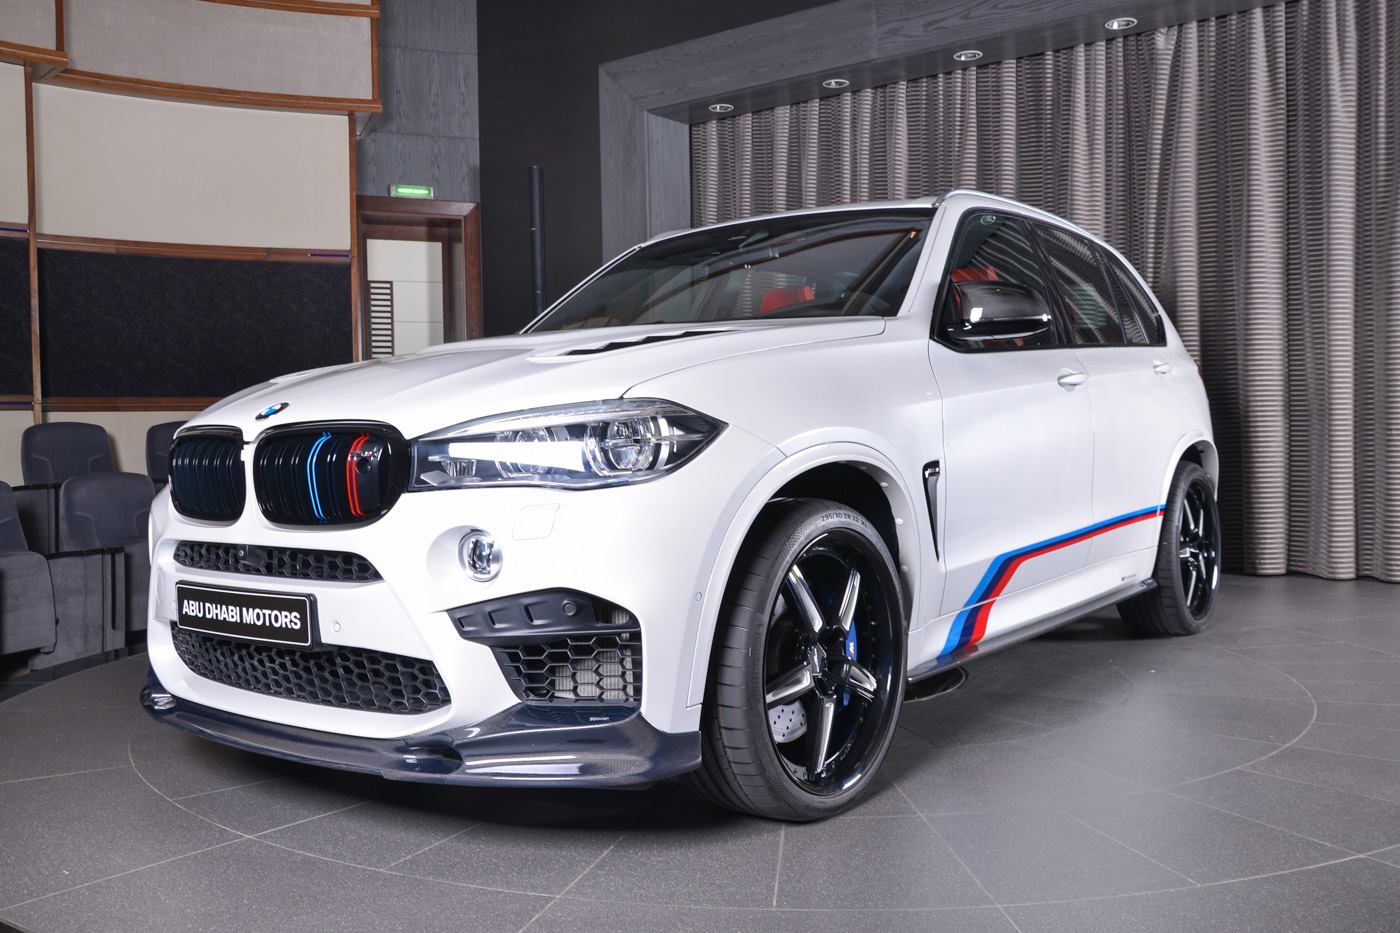 BMW X5 M Gets Seriously Upgraded in Abu Dhabi